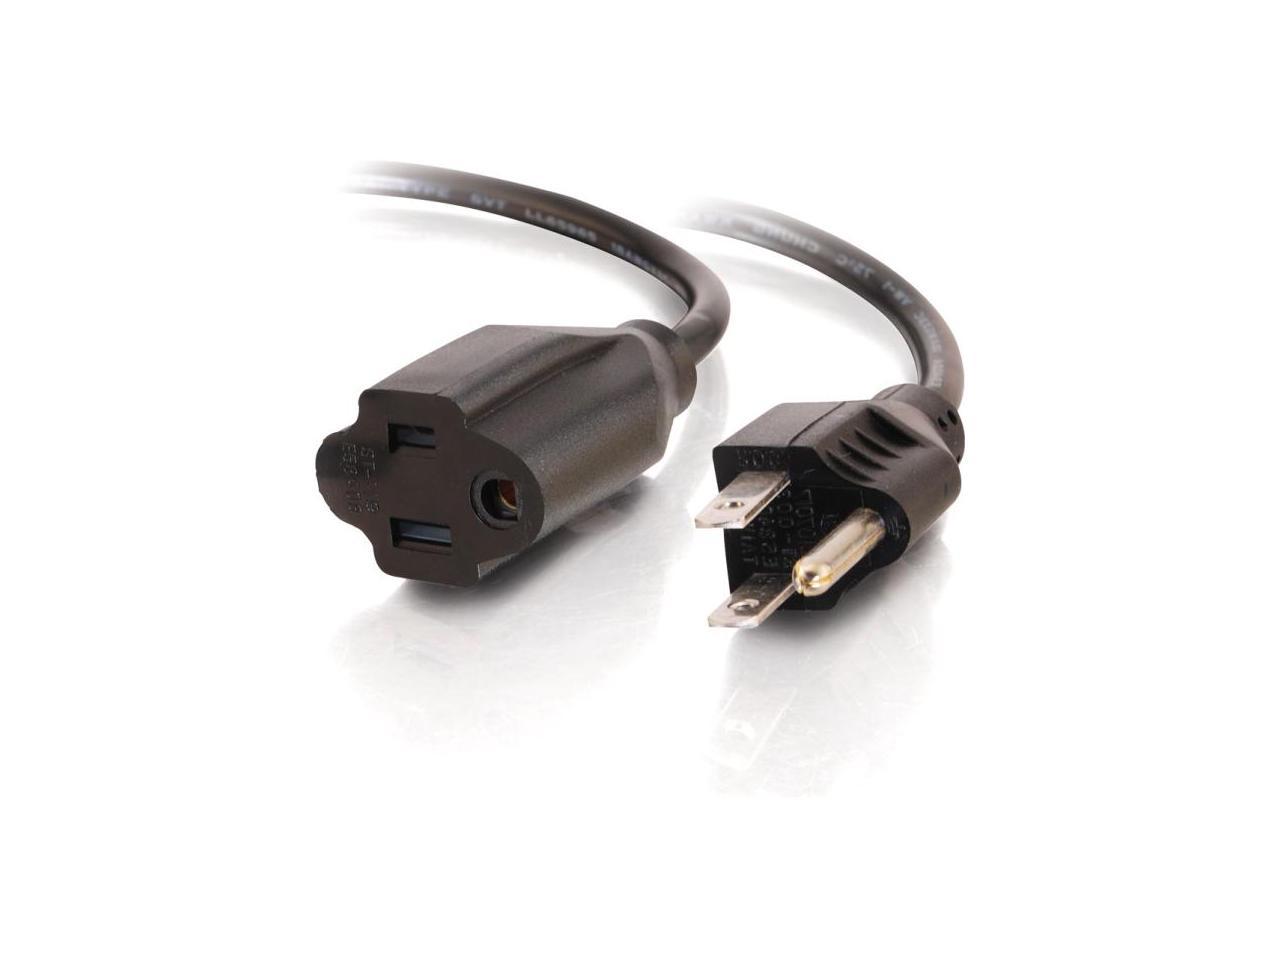 C2G 03115 18 AWG Outlet Saver Power Extension Cord - NEMA 5-15P to NEMA 5-15R, TAA Compliant, Black (6 Feet, 1.82 Meters)